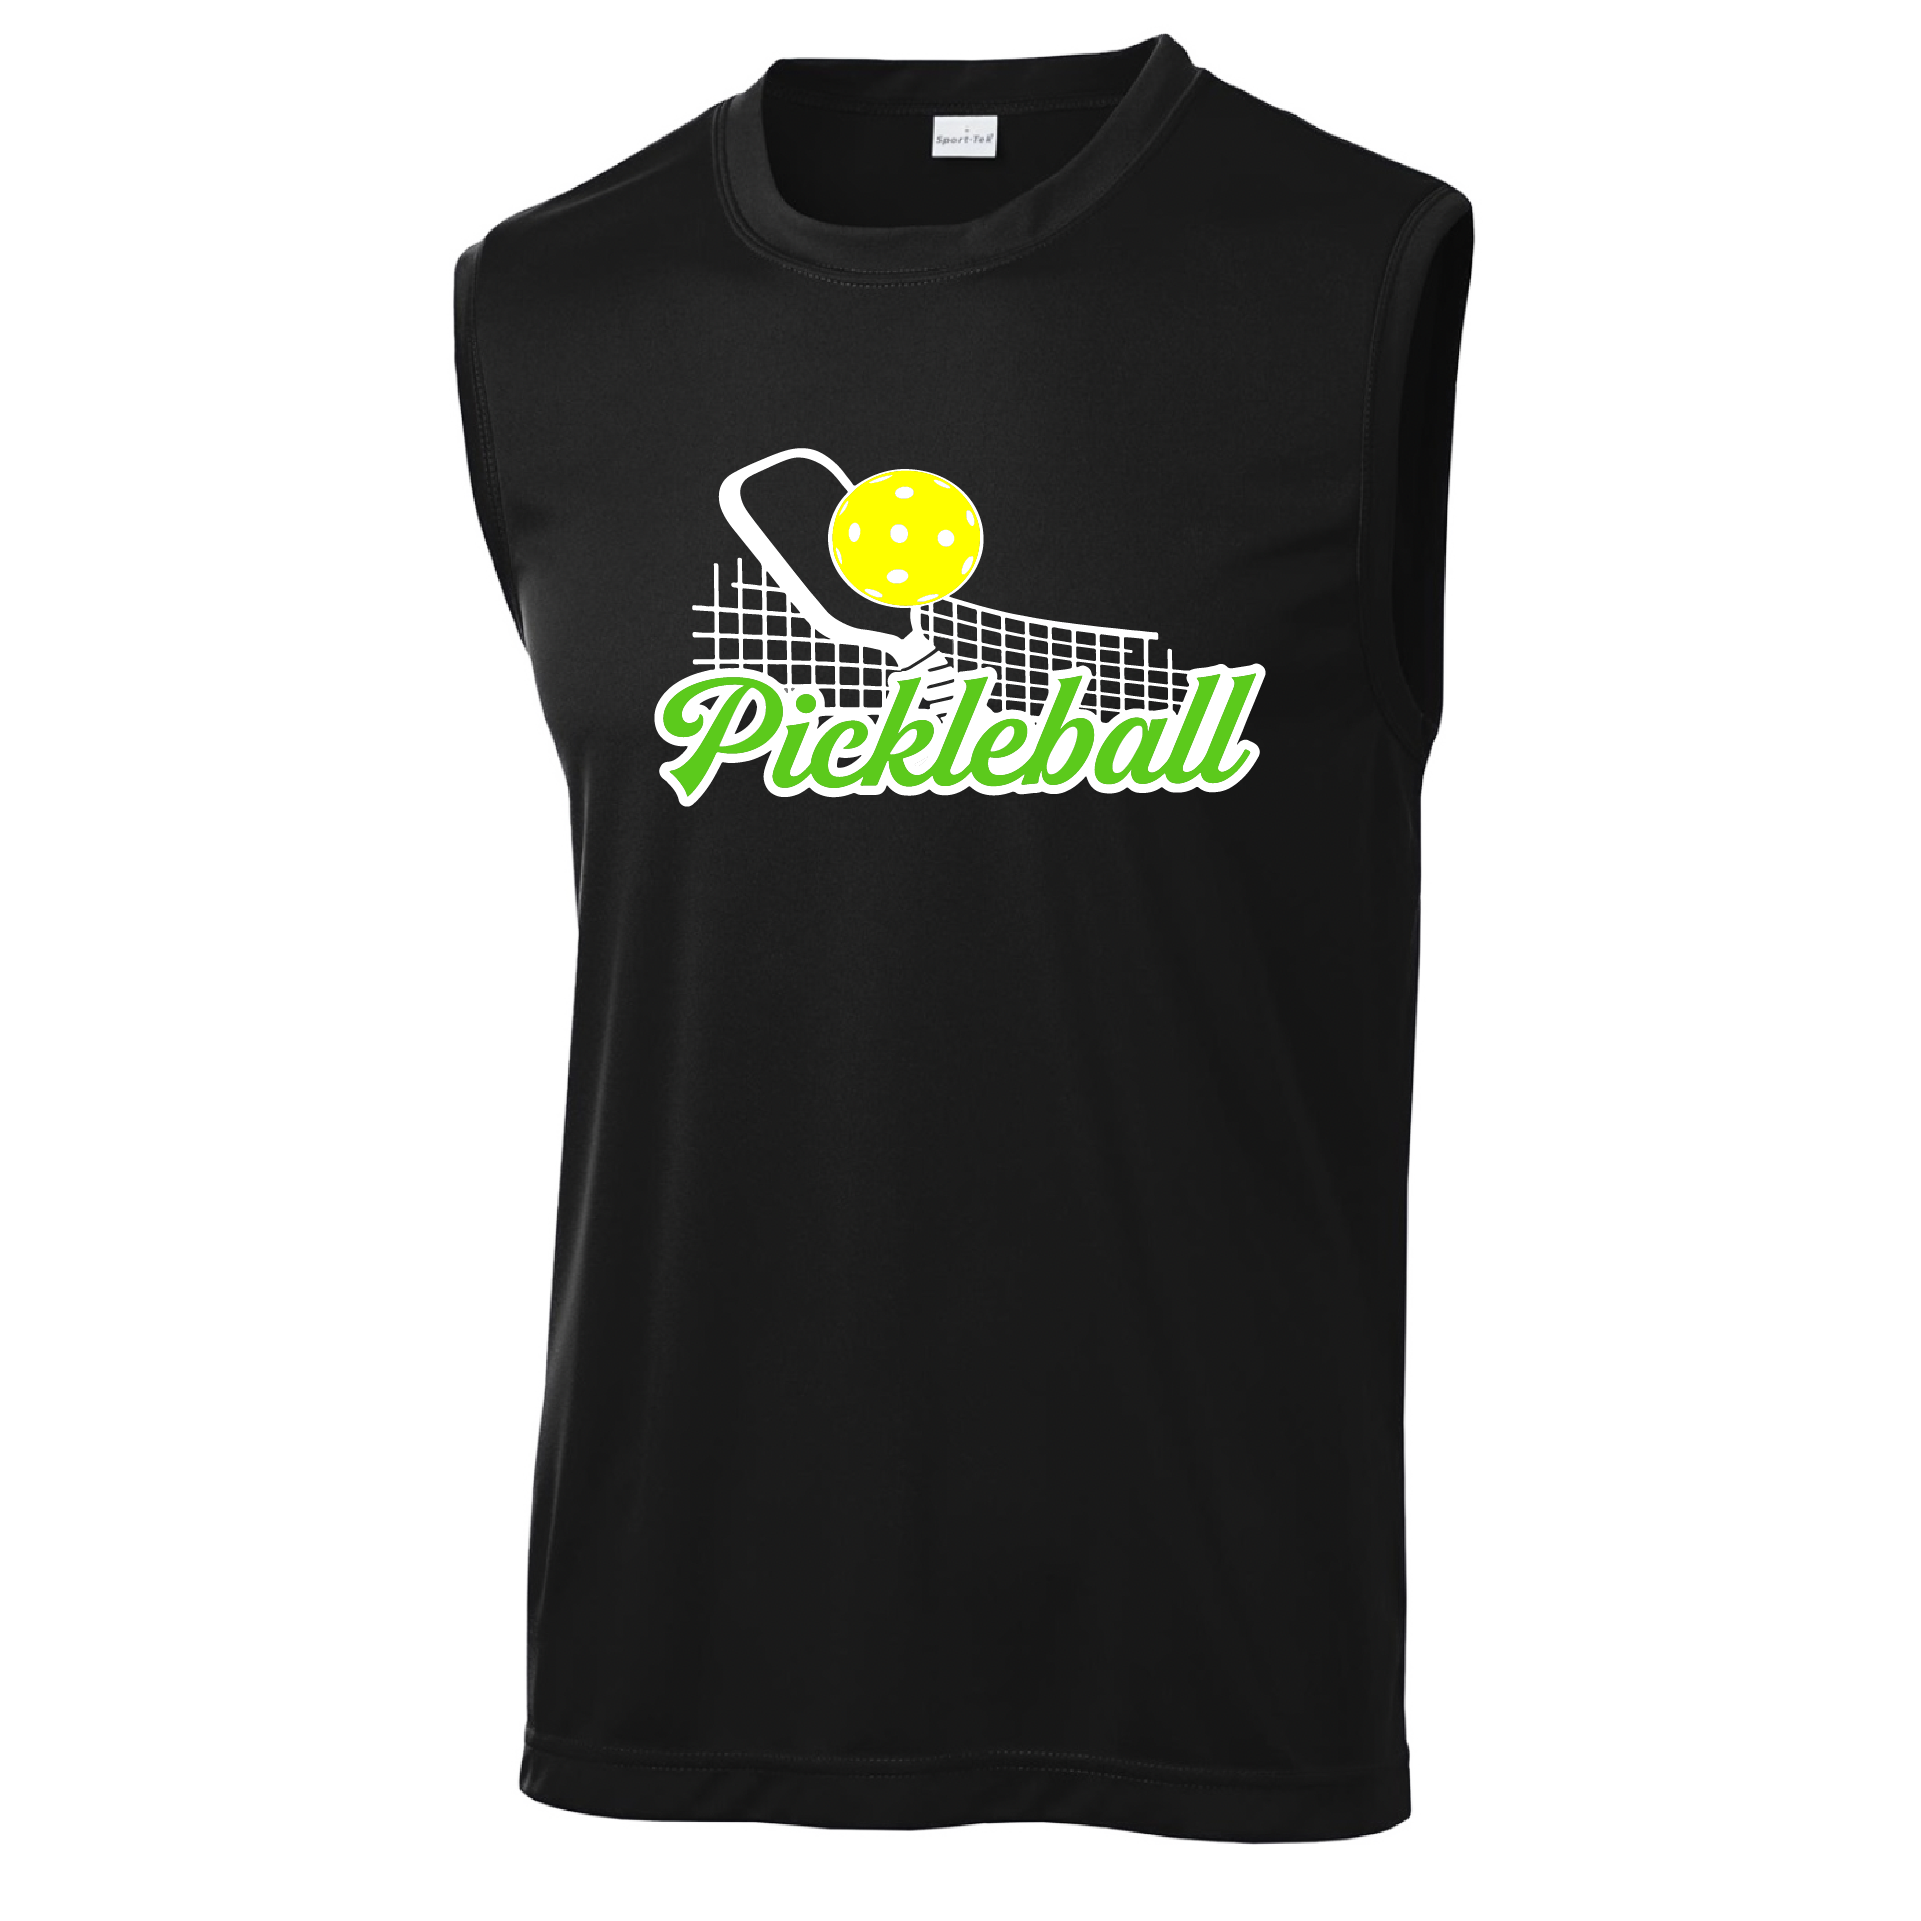 Pickleball Design: Pickleball Net  Men's Style: Sleeveless  Shirts are lightweight, roomy and highly breathable. These moisture-wicking shirts are designed for athletic performance. They feature PosiCharge technology to lock in color and prevent logos from fading. Removable tag and set-in sleeves for comfort.